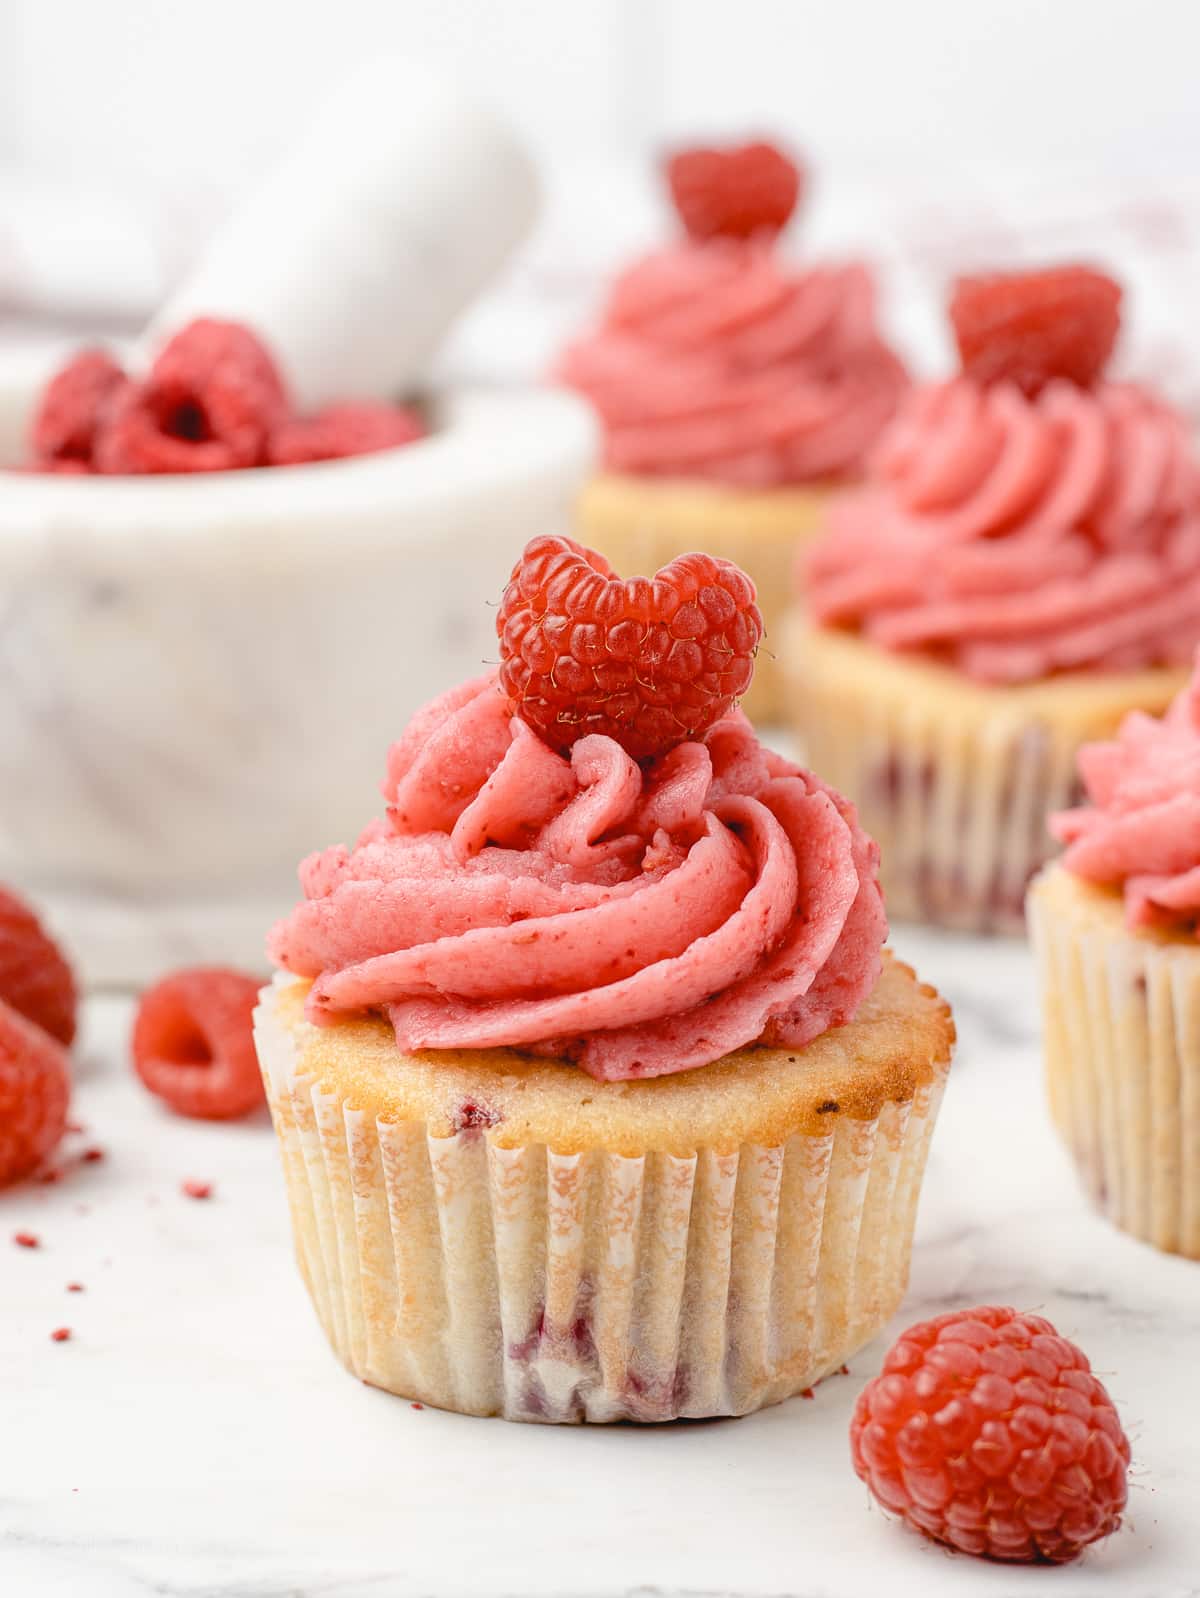 Decorated cupcakes with freeze dried raspberries in a mortar and pestle with fresh raspberries scattered.